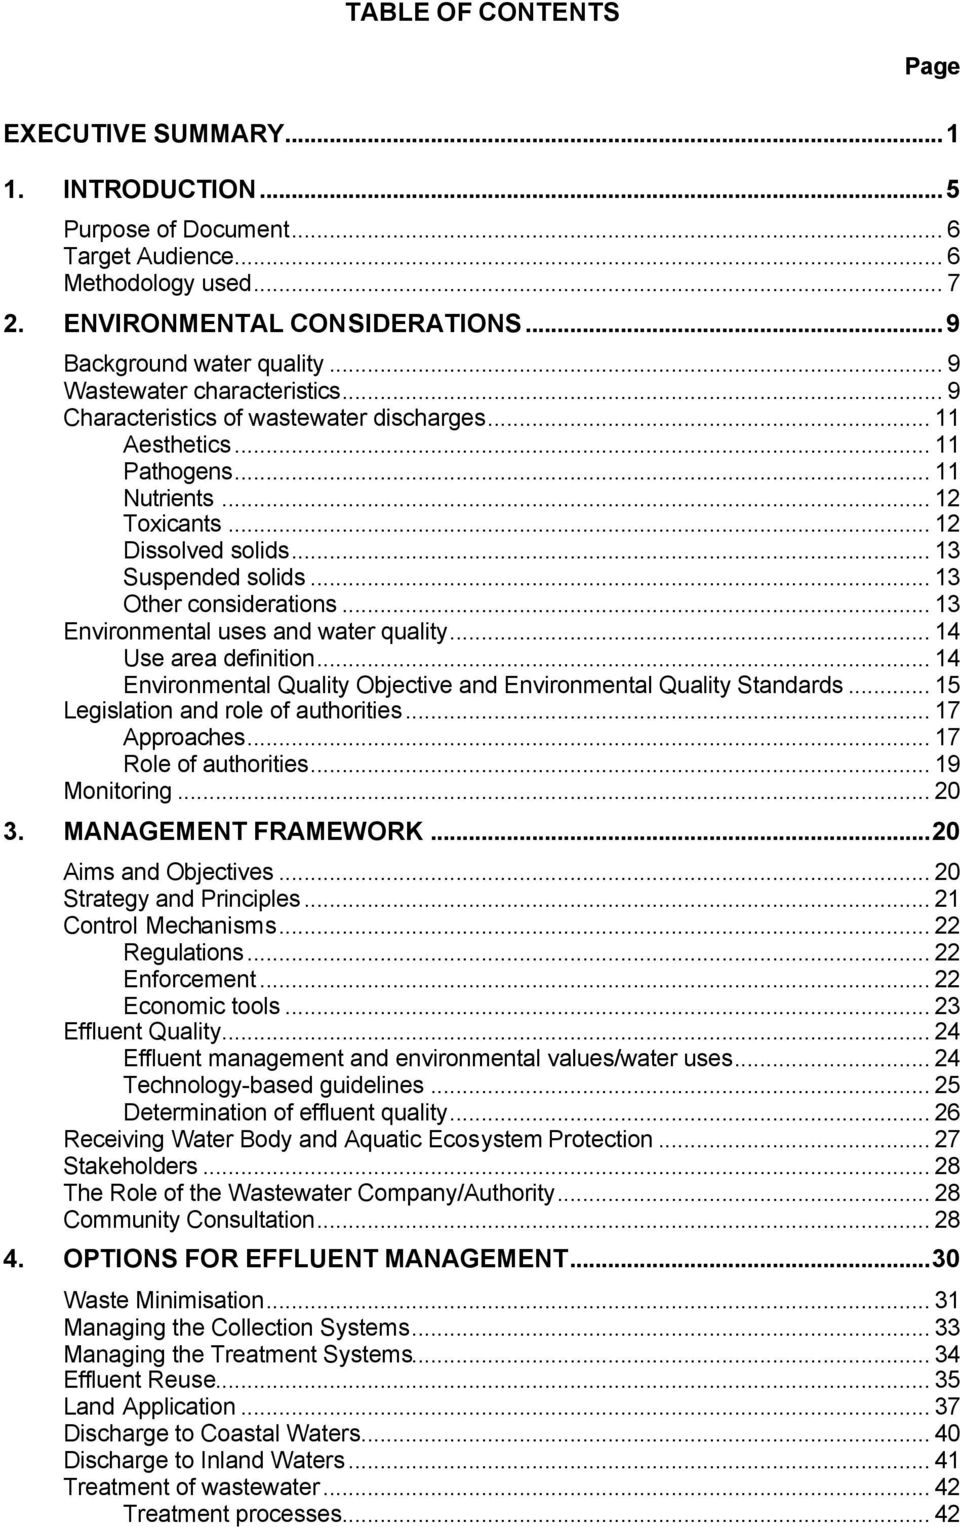 .. 13 Other considerations... 13 Environmental uses and water quality... 14 Use area definition... 14 Environmental Quality Objective and Environmental Quality Standards.